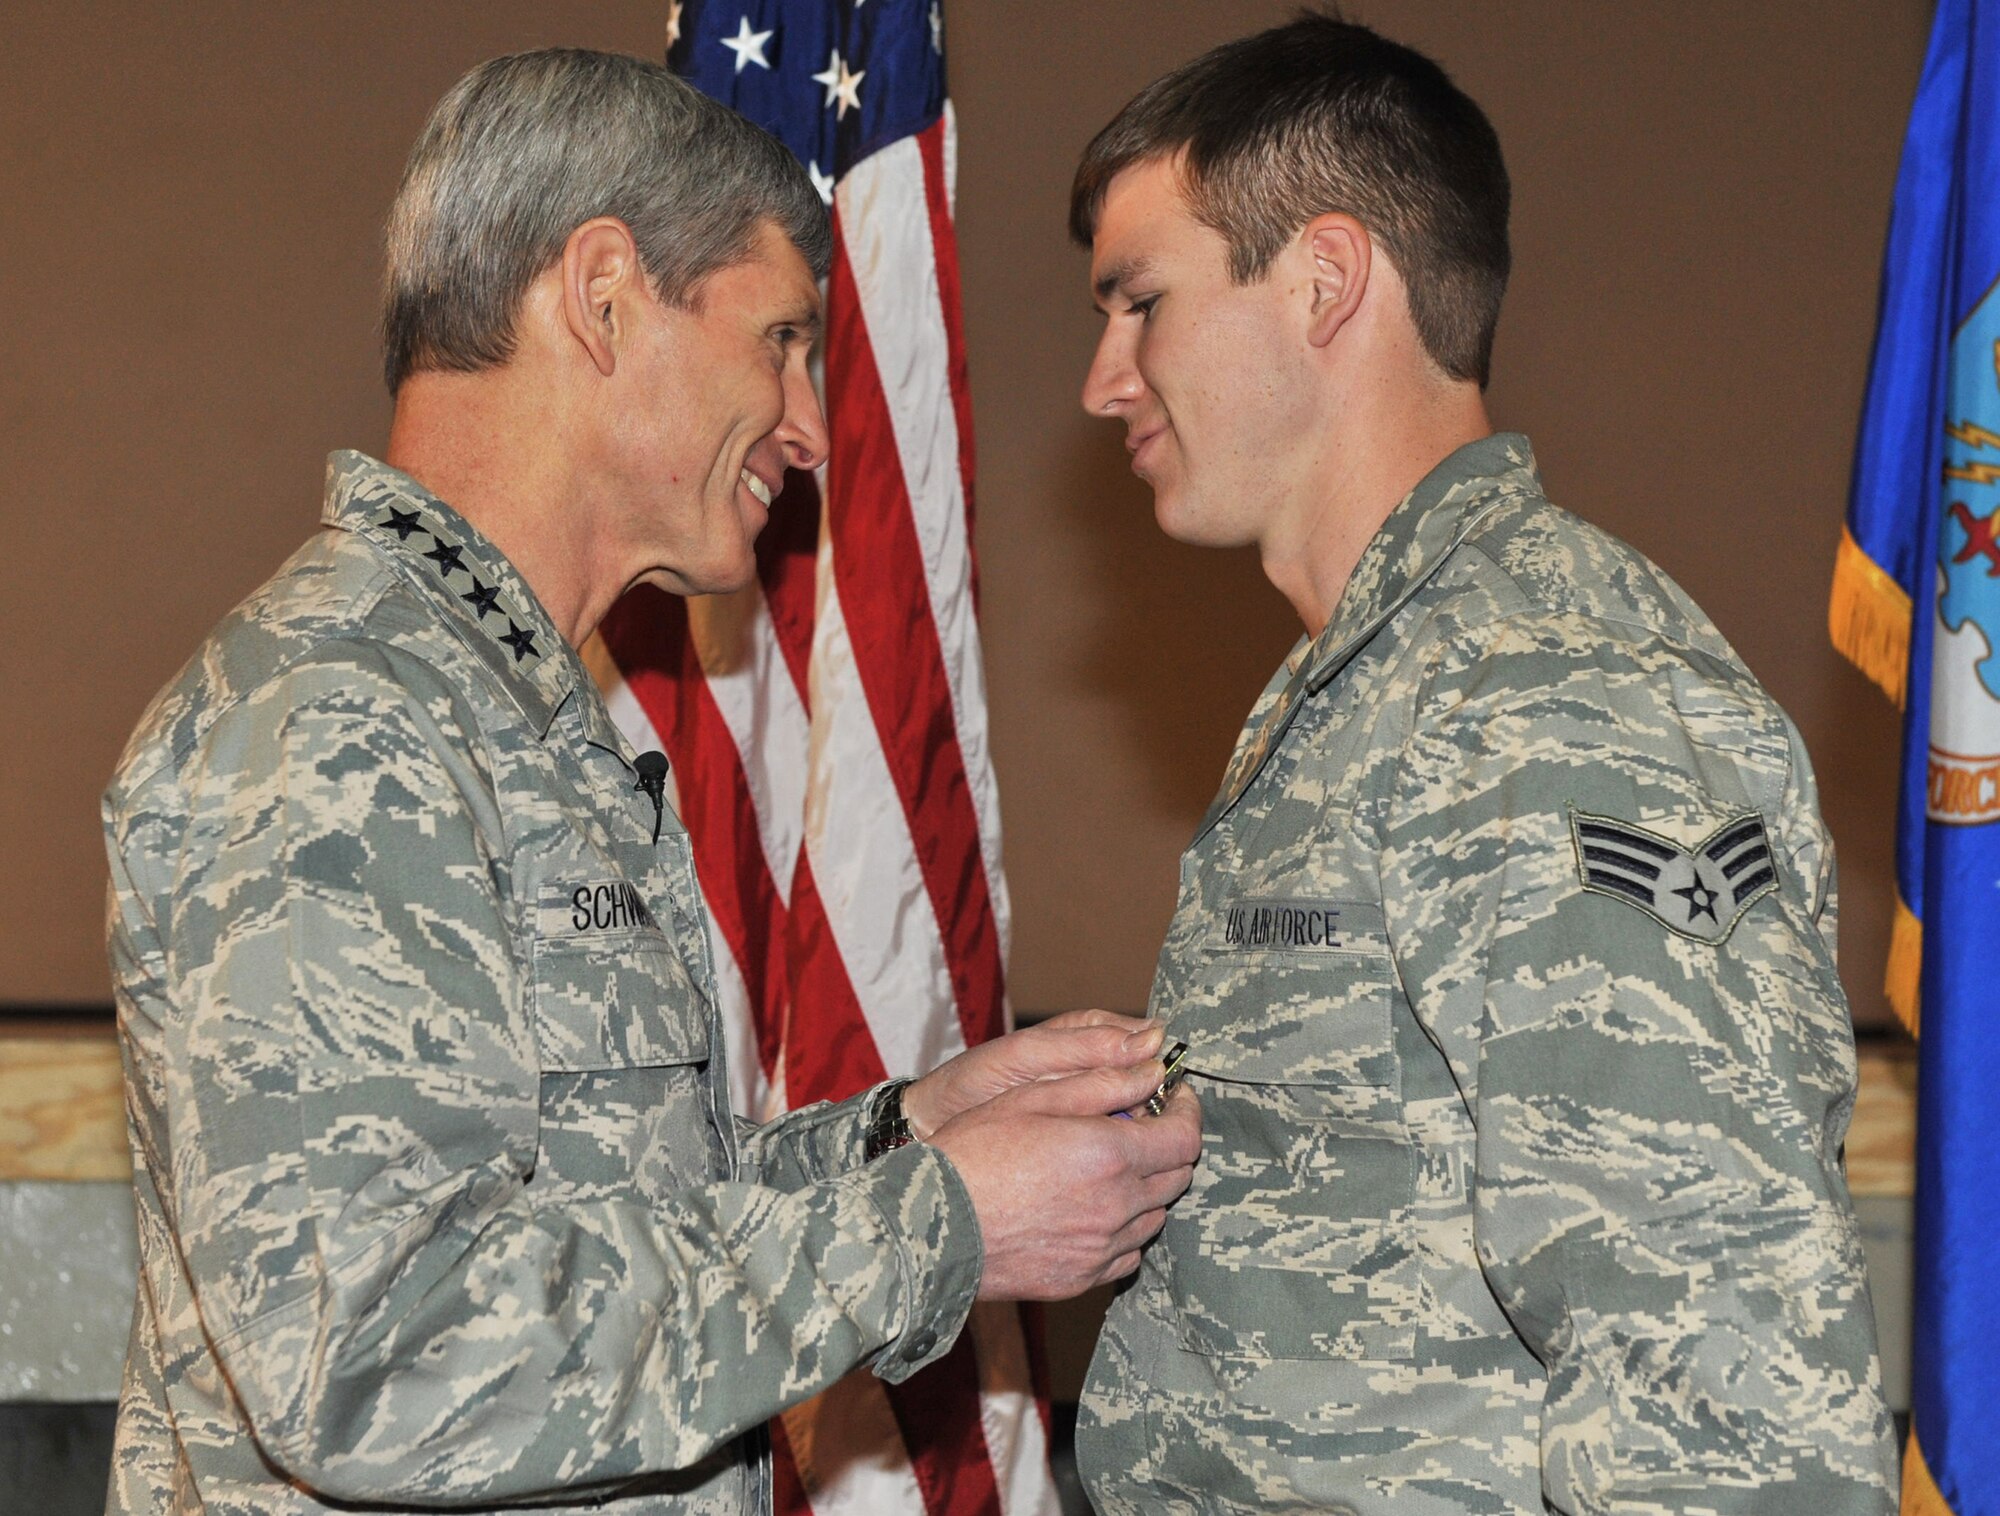 Air Force Chief of Staff Gen. Norton Schwartz pins a Purple Heart medal on Senior Airman Brandon Cullen Towle, a joint terminal attack controller assigned to the 817th Expeditionary Air Support Operations Squadron, during a ceremony at Bagram Airfield, Afghanistan, on Jan. 19, 2011.  (U.S. Air Force photo/Senior Airman Shelia deVera)